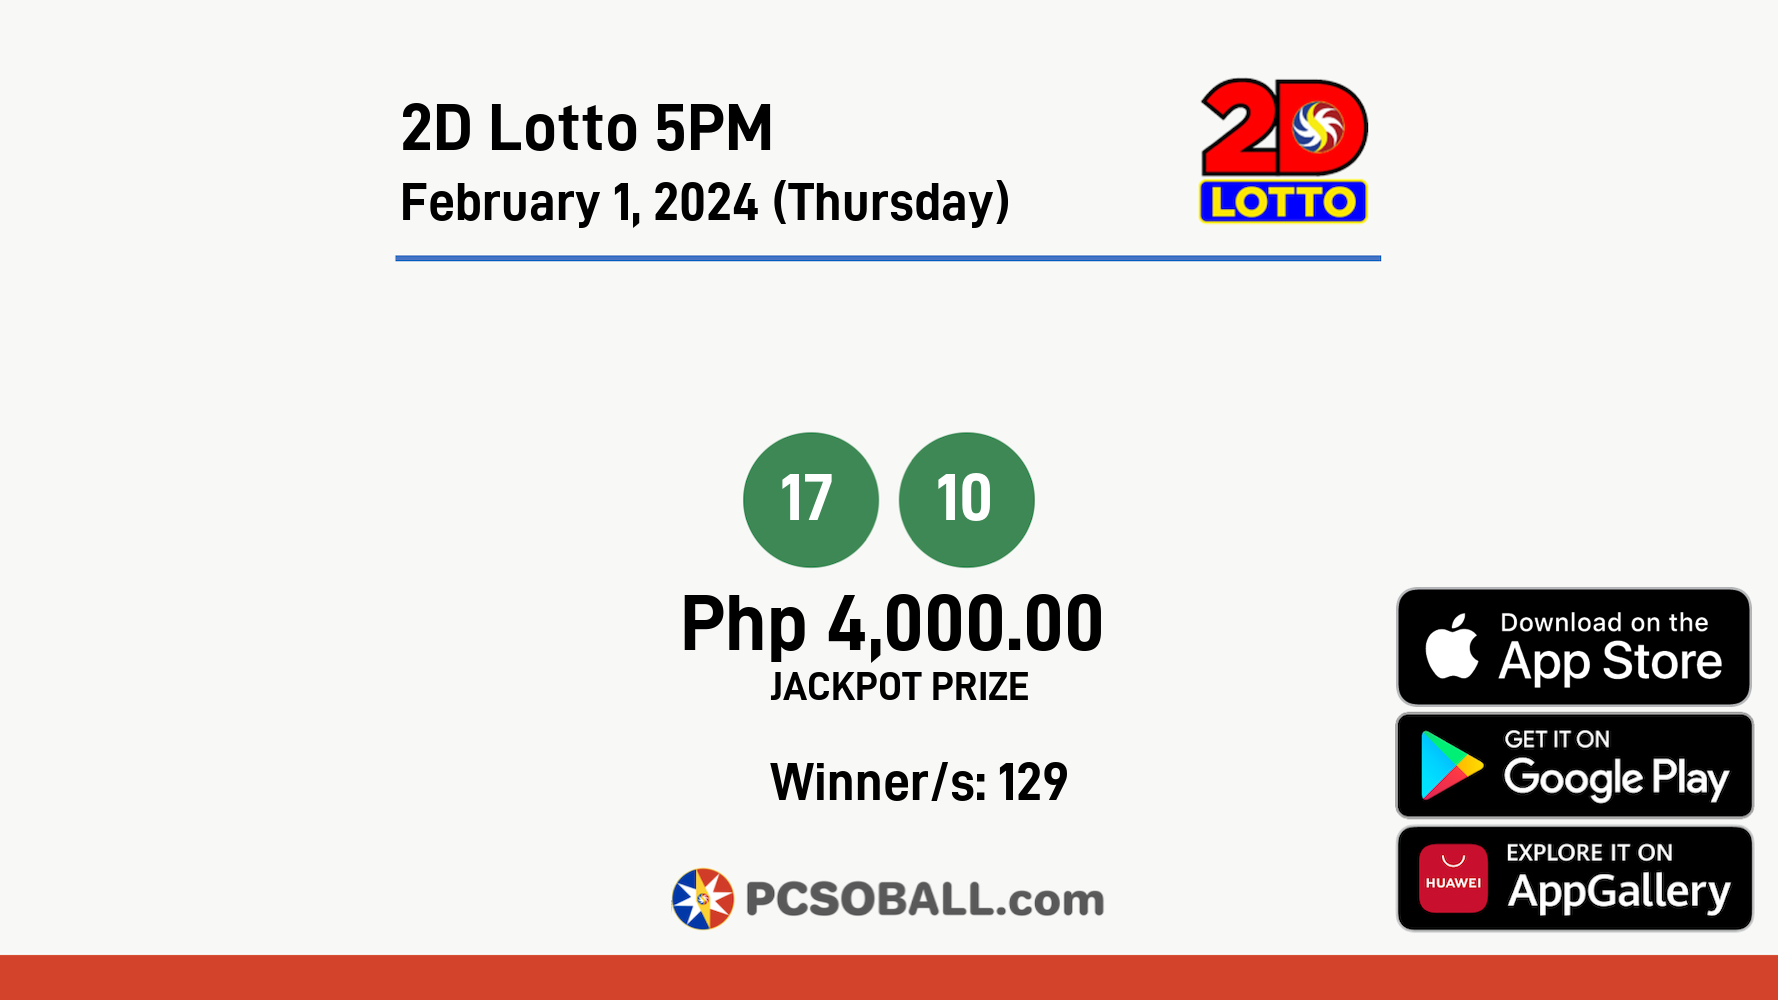 2D Lotto 5PM February 1, 2024 (Thursday) Result